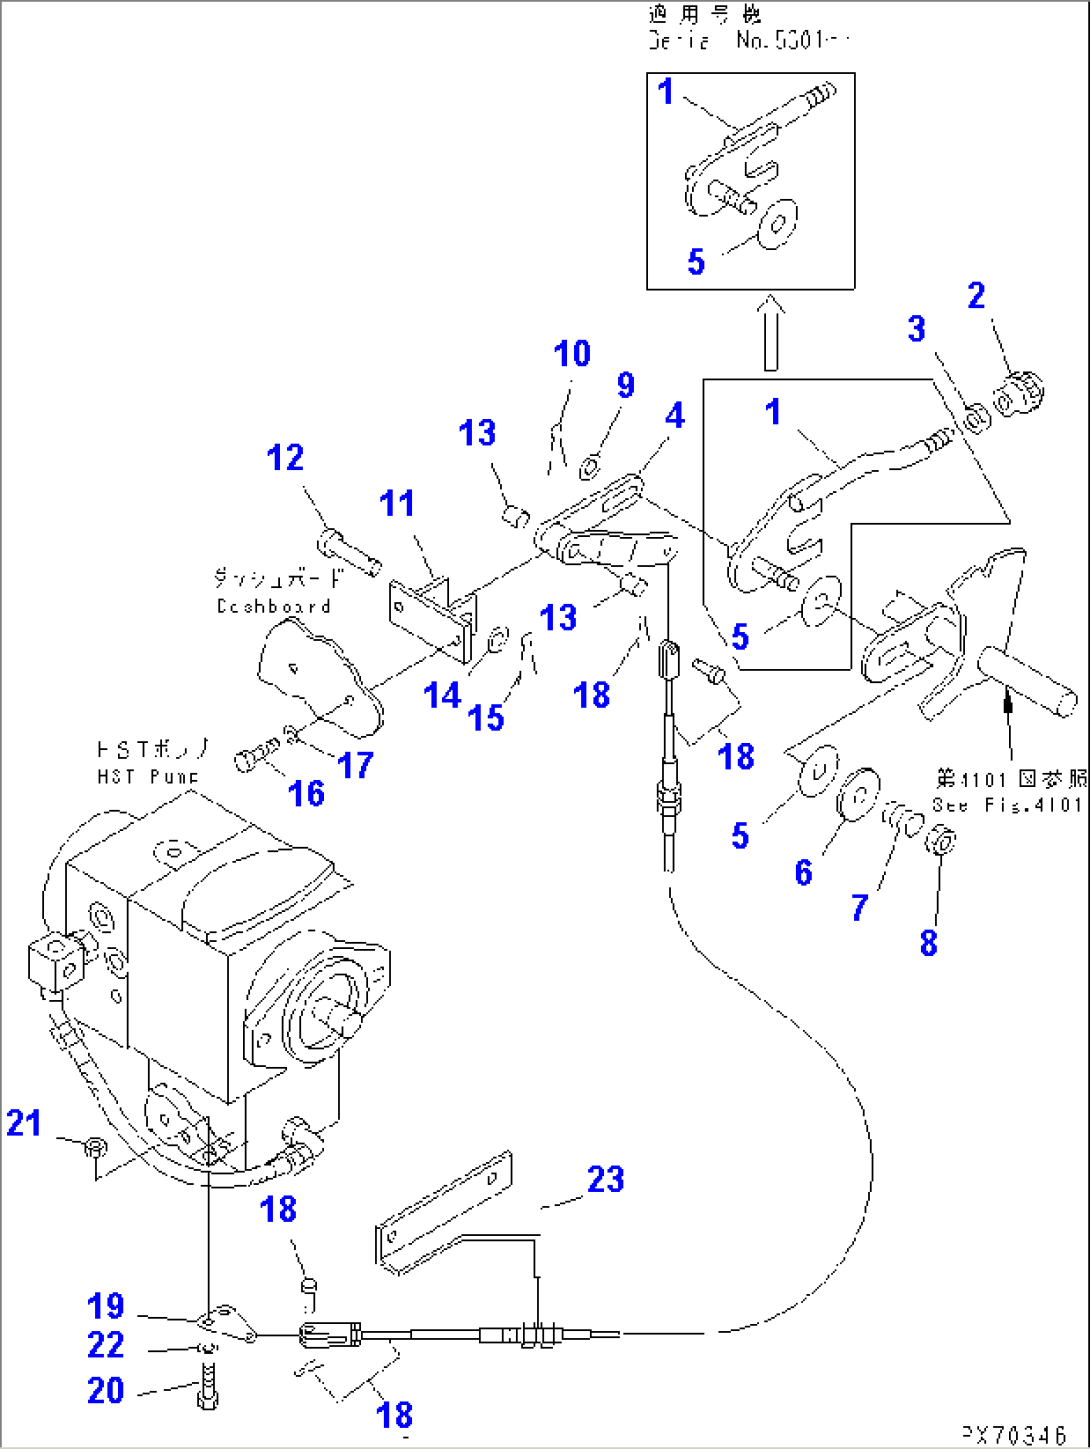 HIGH AND LOW SPEED CONTROL LEVER